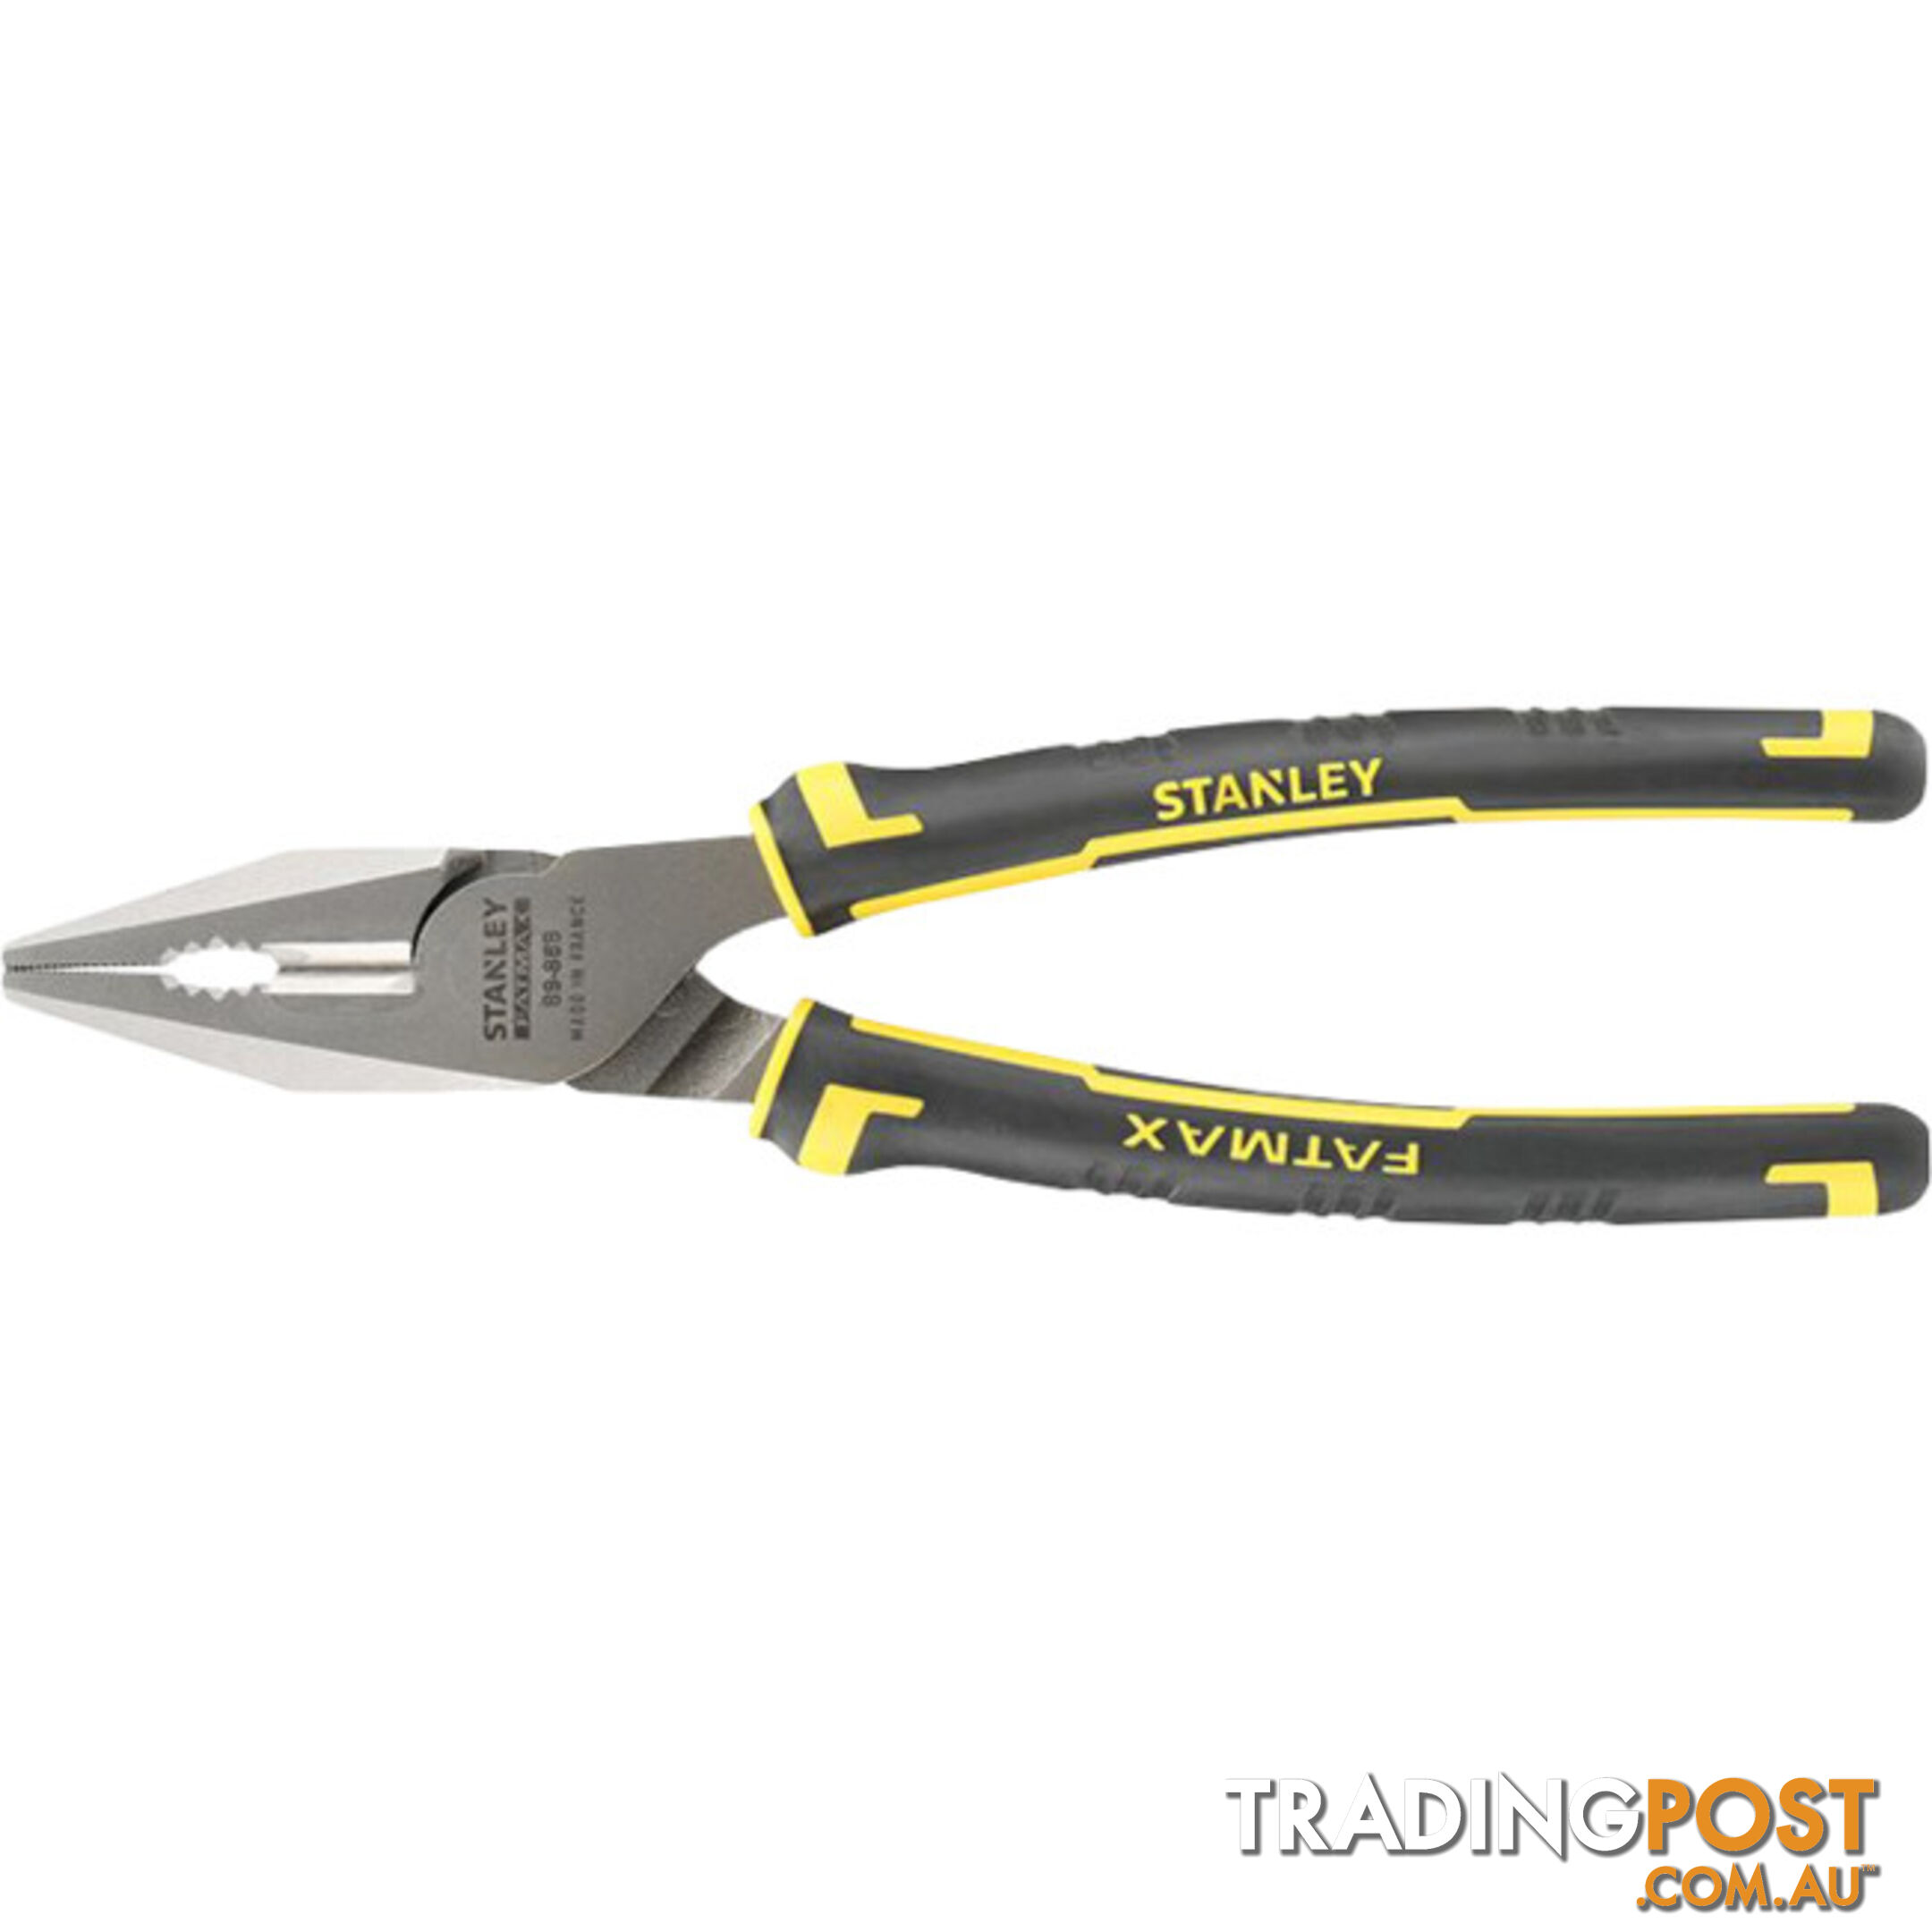 89-868 200MM COMBINATION PLIER MADE IN FRANCE